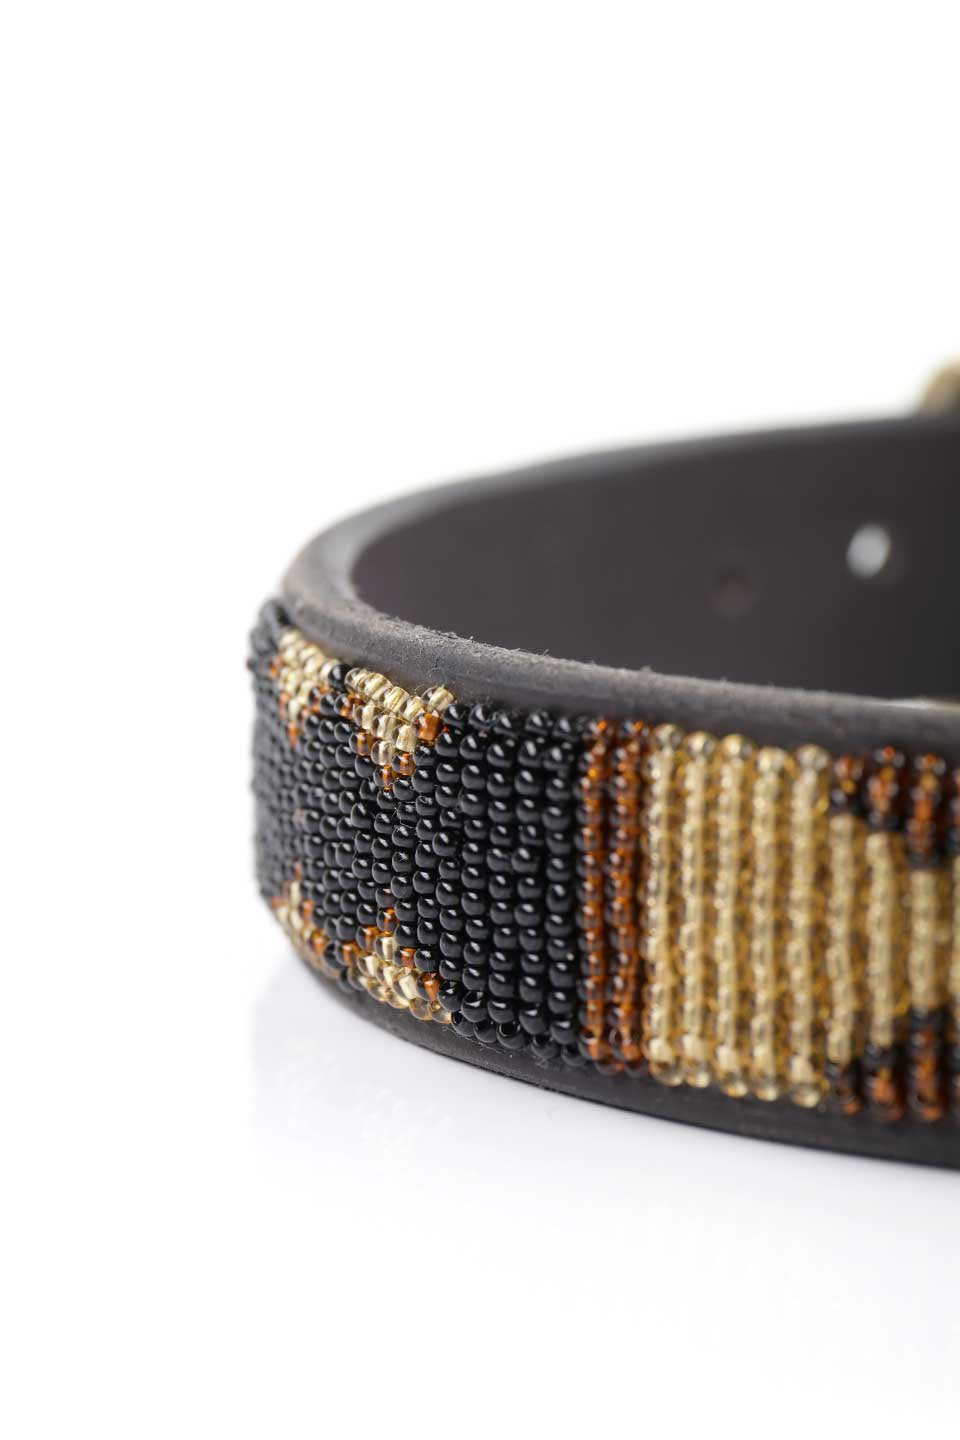 Earth Beaded Dog Collar 16" アース・ビーズドッグカラー / by THE KENYAN COLLECTION